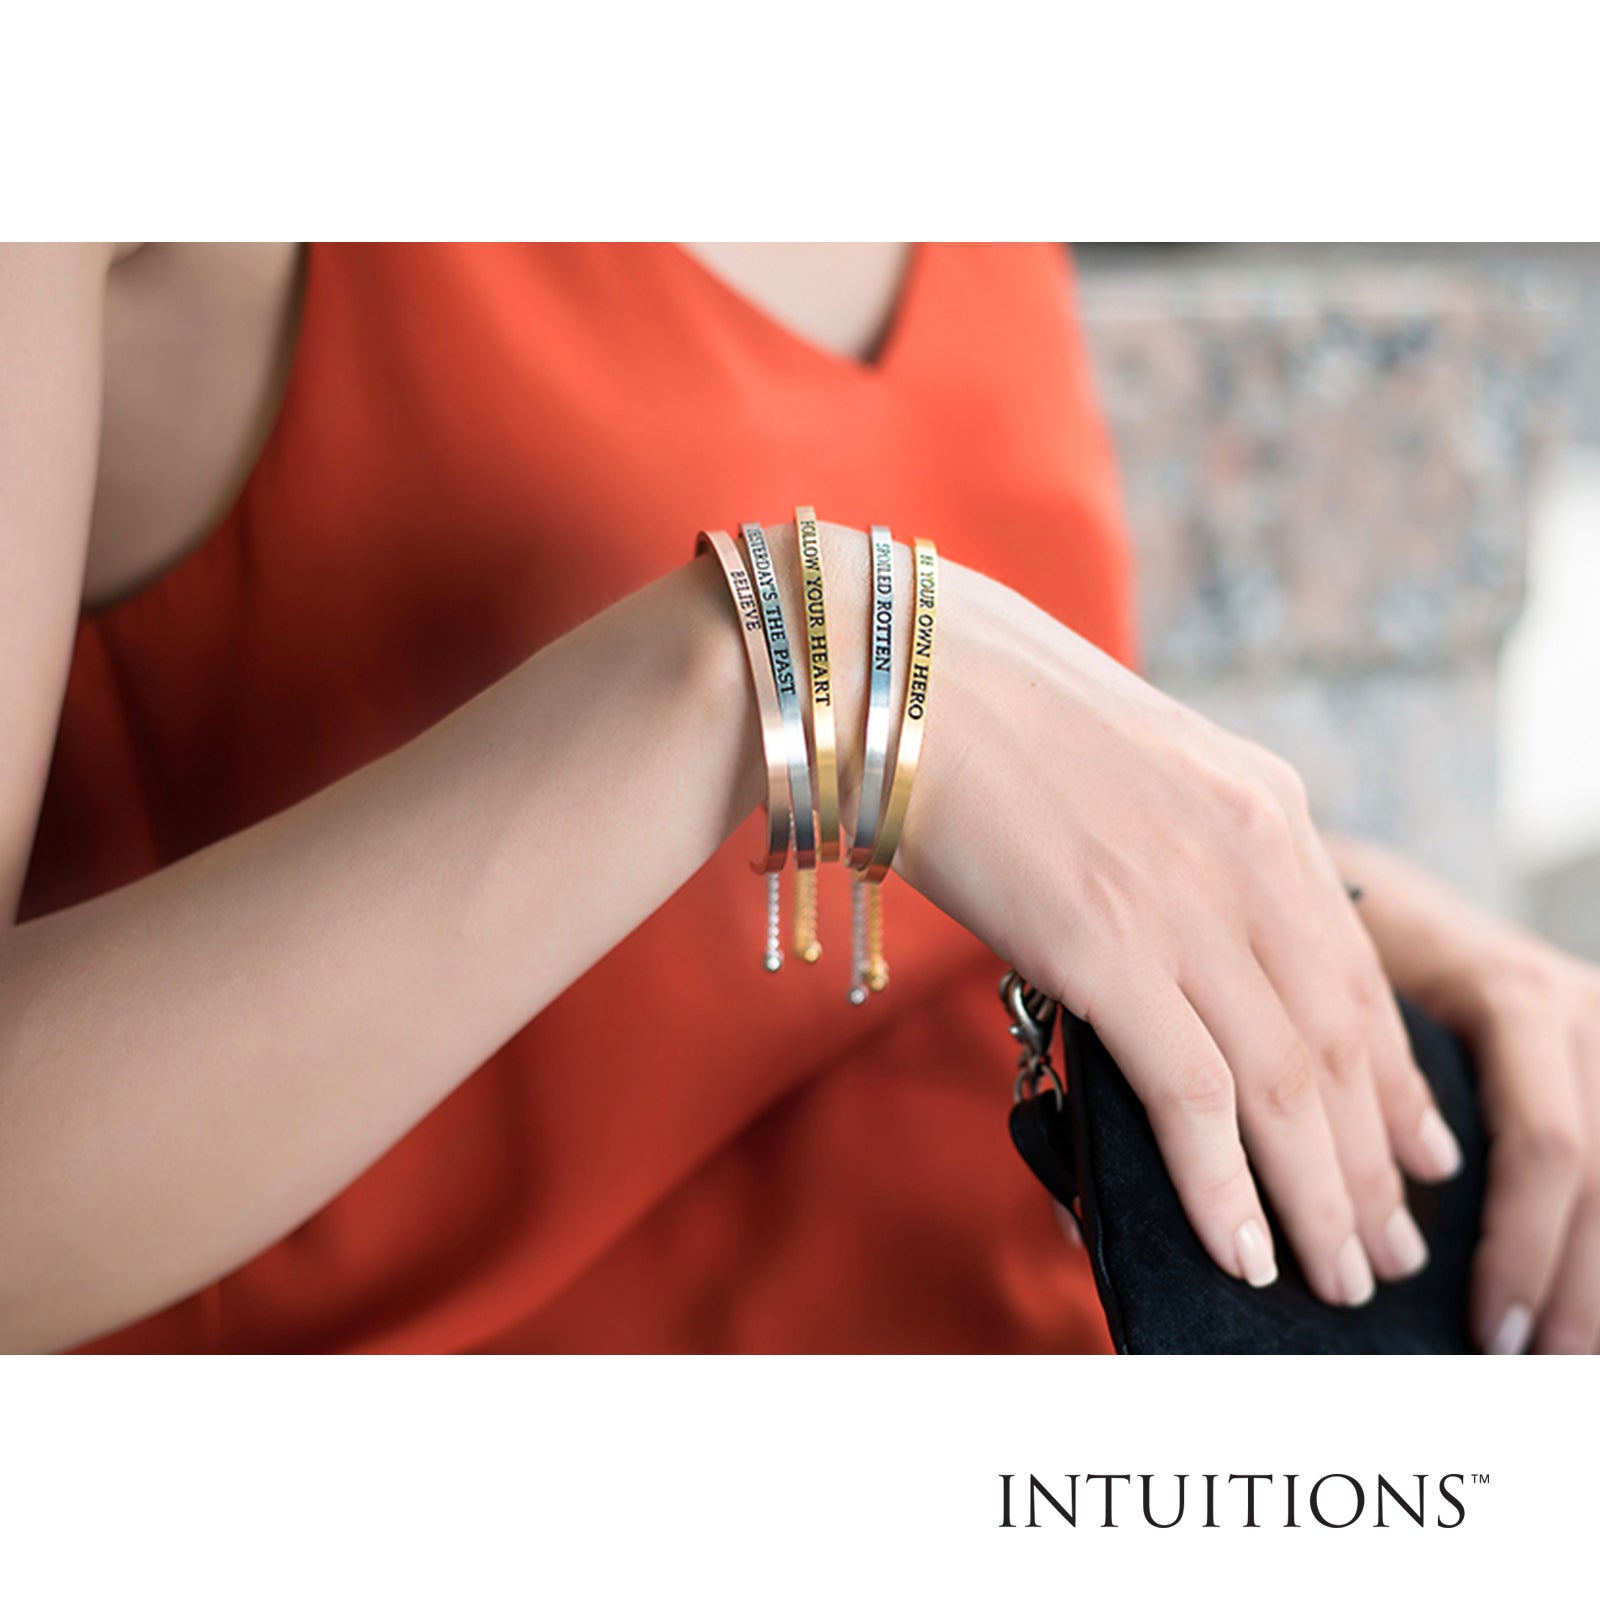 Intuitions Stainless Steel Satin Square Love Bangle Bracelet fine designer jewelry for men and women